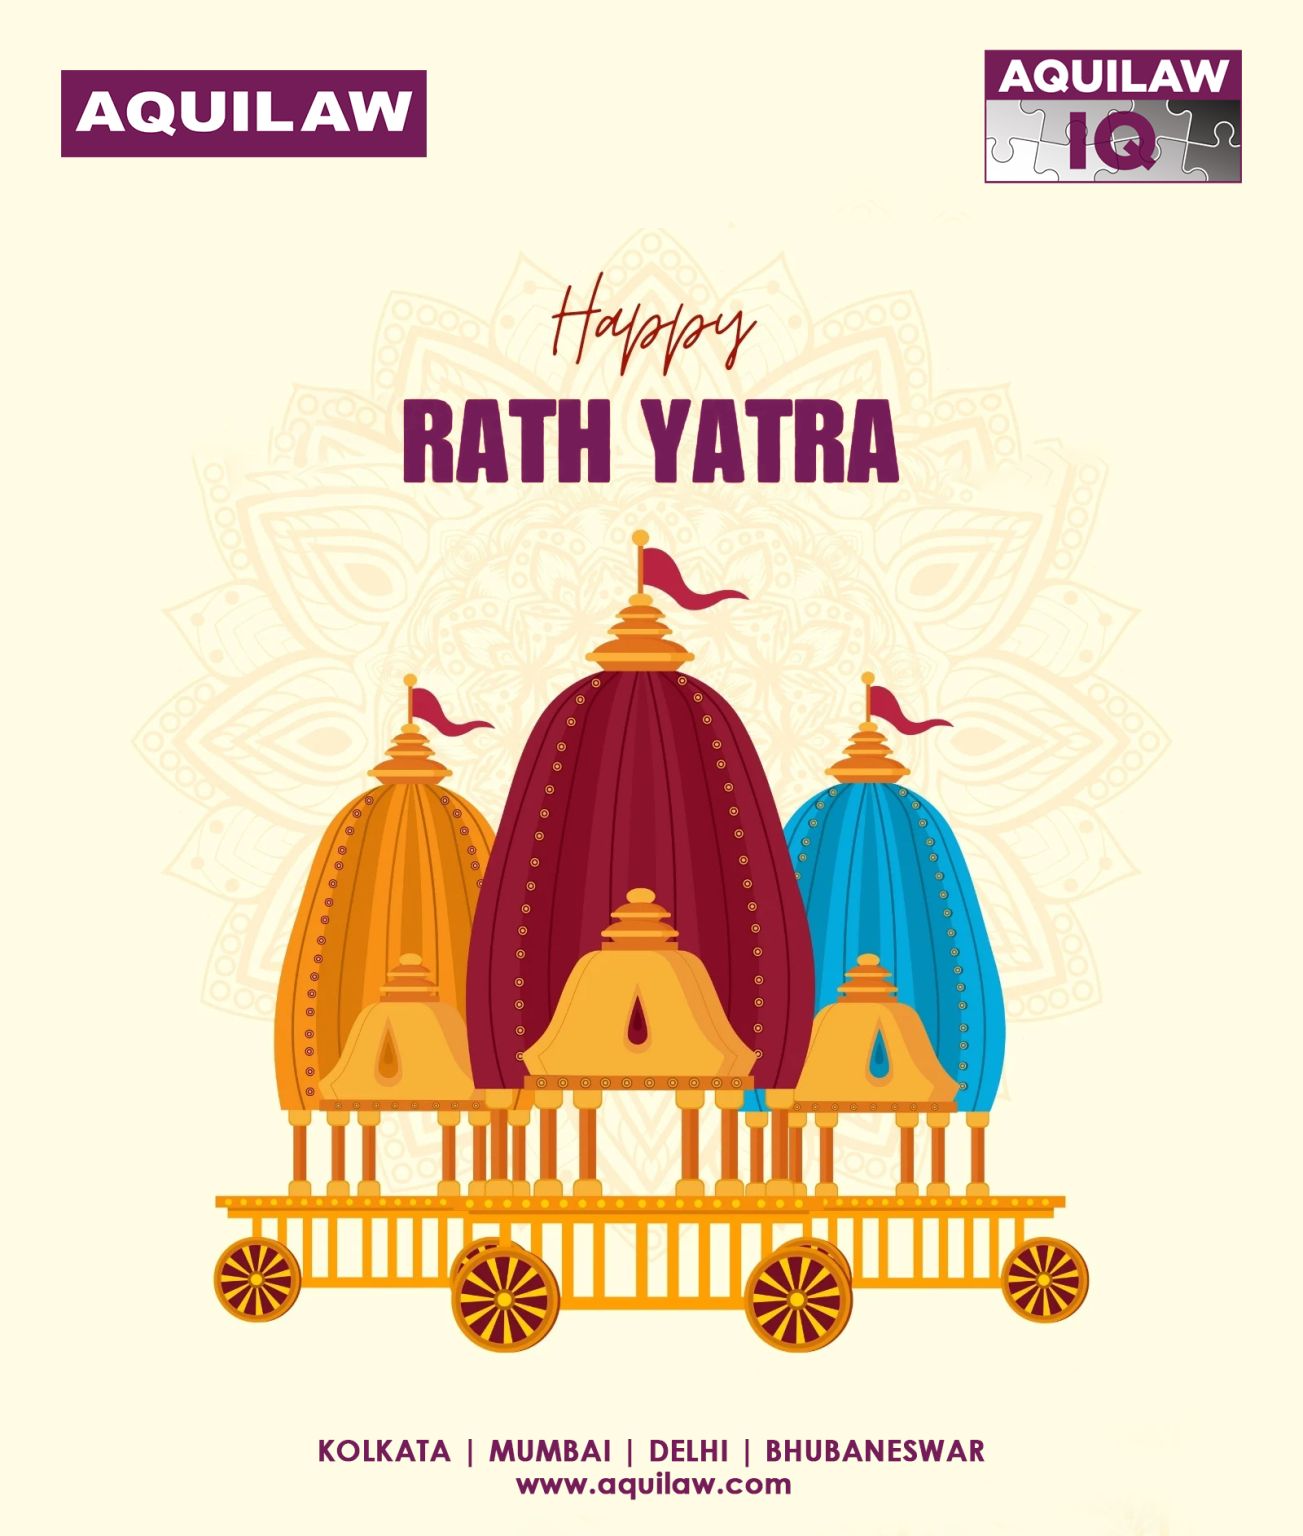 Happy Rath Yatra from all of us at AQUILAW! May this auspicious occasion bring joy, prosperity, and unity to all.